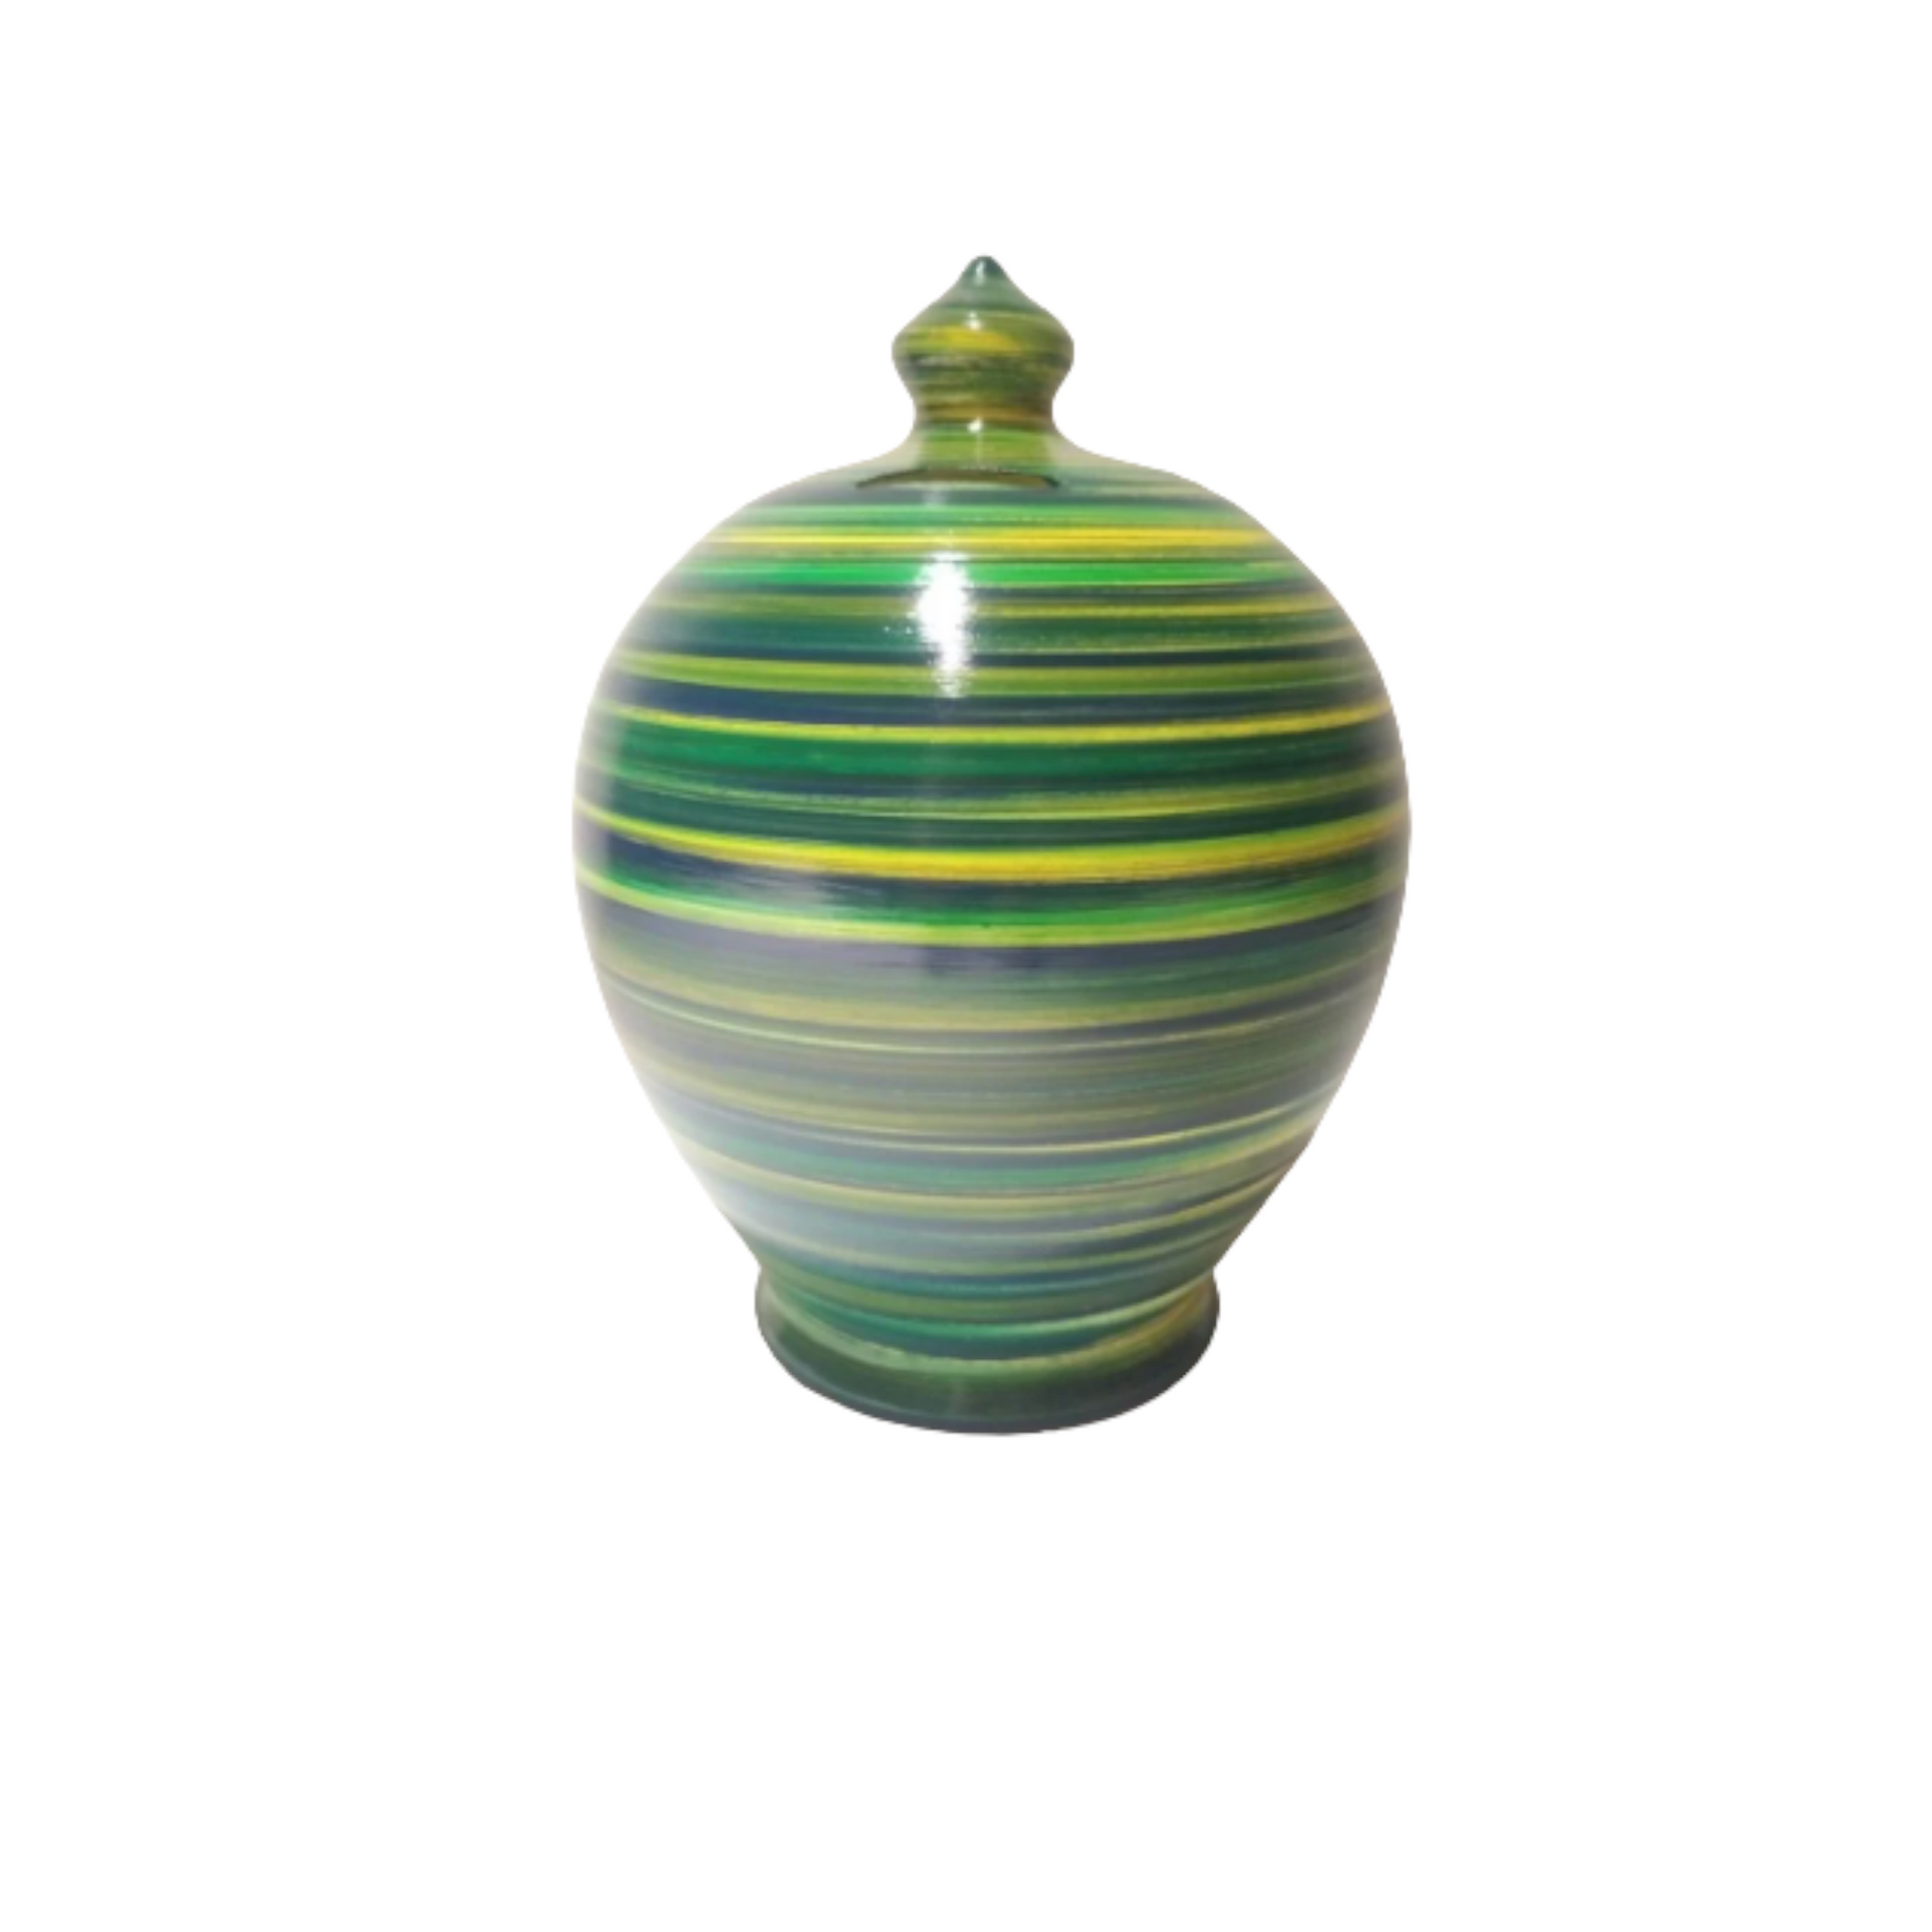 Handmade in Italy, the ideal gift for piggy bank lovers both kids and adults! Colors: Yellow, Blue and Green. 💰Size: 15 cm = 5.90 inches in height. Circumference: 40 cm = 15.74 inches. With hole and stopper plug, or without hole.